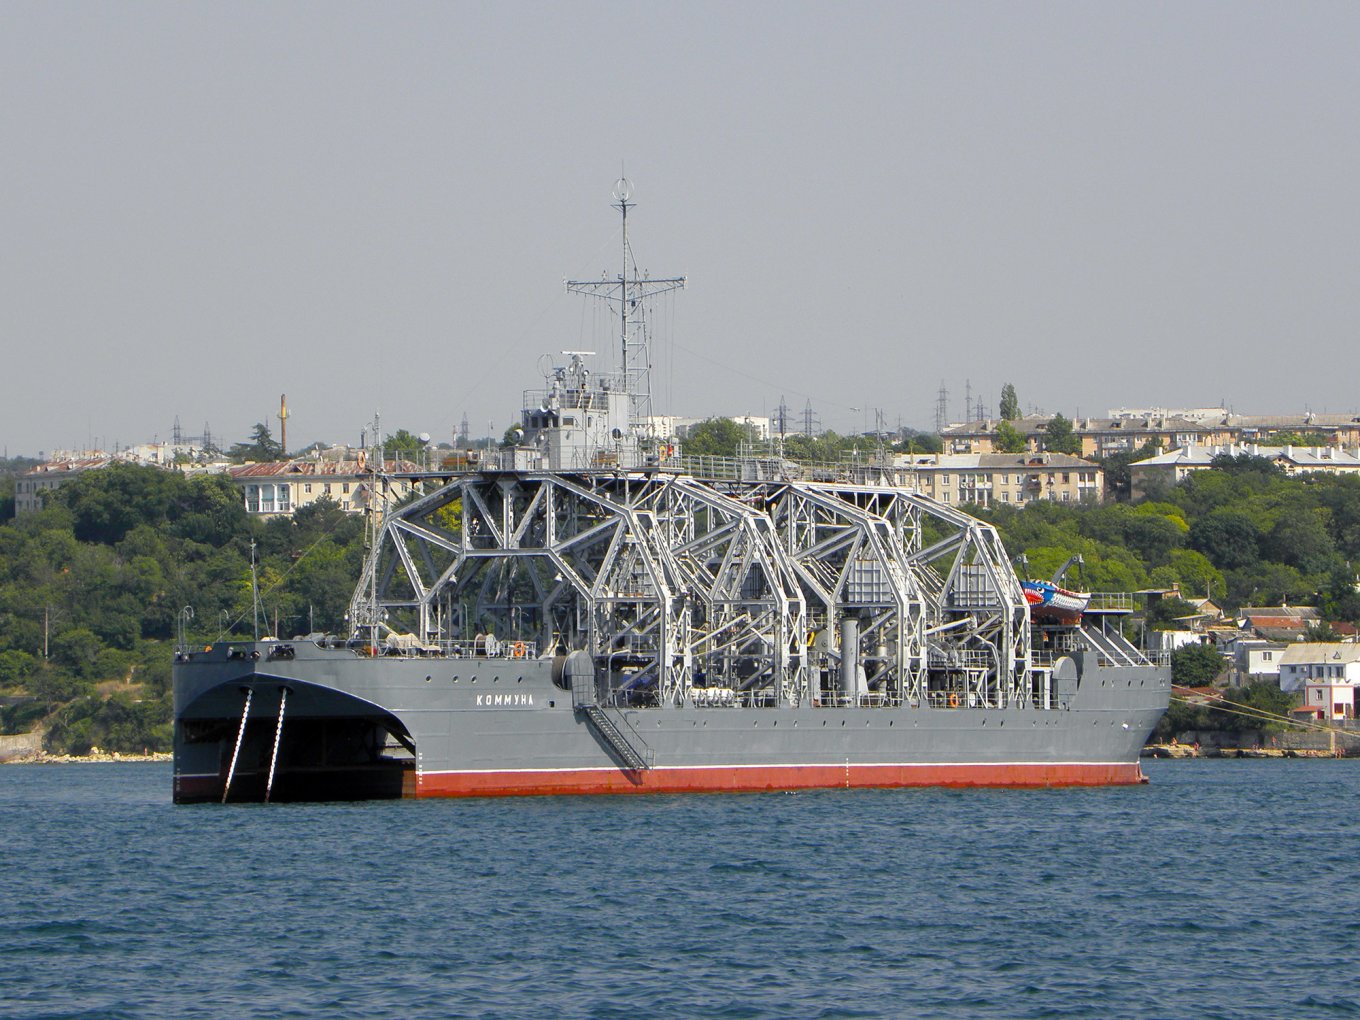 The Kommuna ship Defense Express What Was Targeted in Sevastopol: the Kommuna Salvage Ship or One of the Large Landing Ships